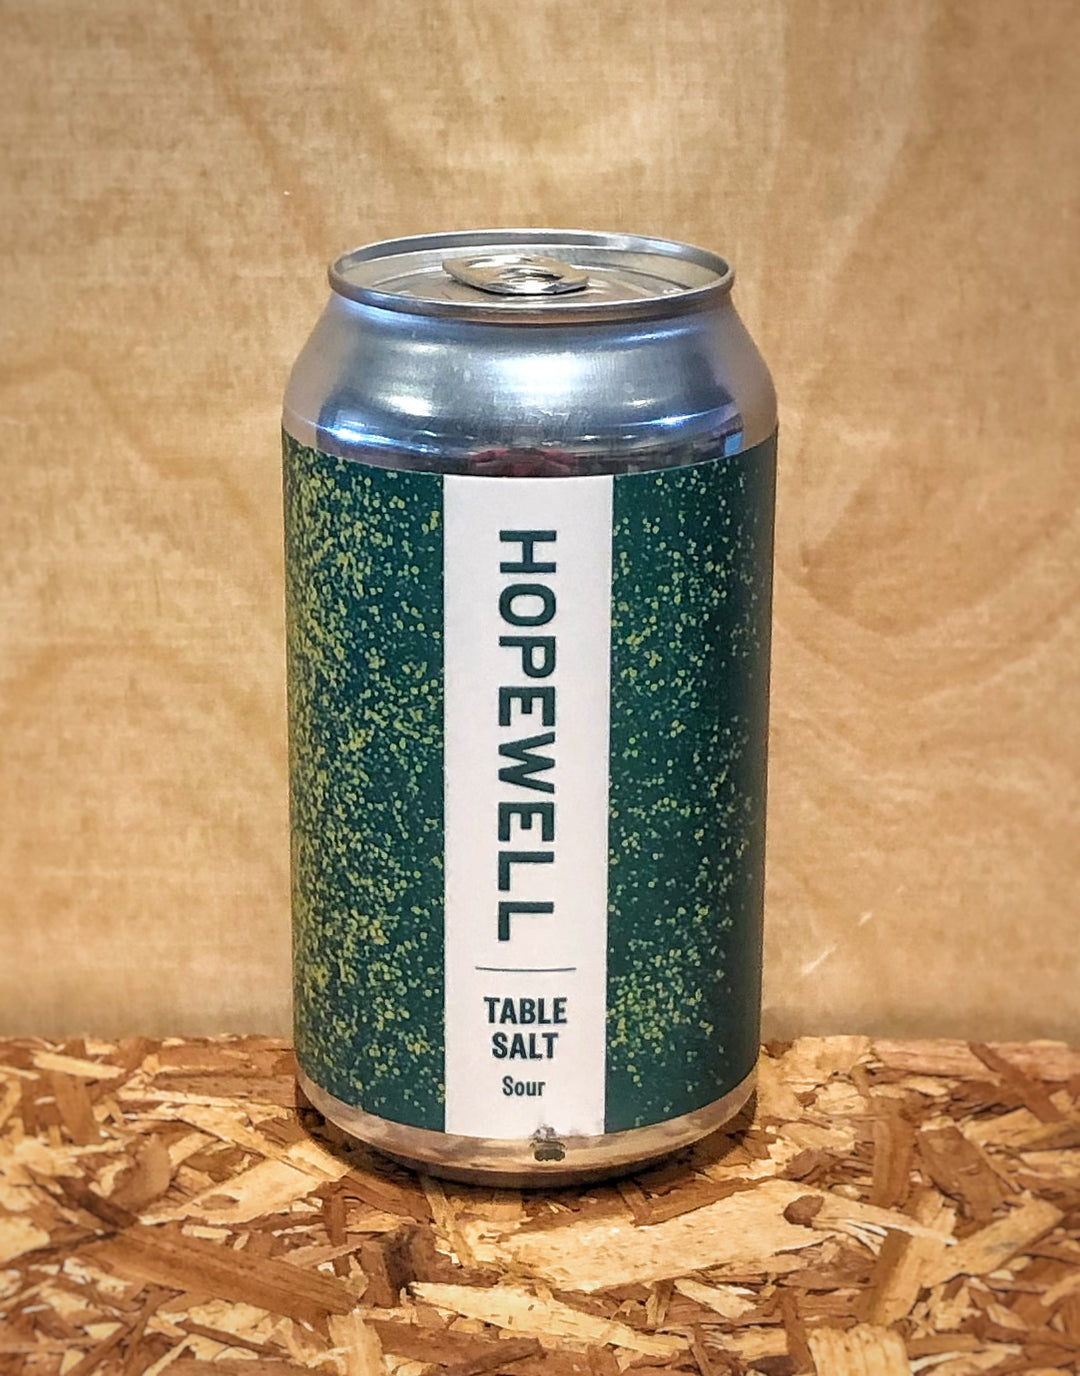 Hopewell 'Table Salt' Gose Style Sour Ale Brewed with Sea Salt, Lemongrass, Lime Leaf, and Cardamom(Chicago, IL)